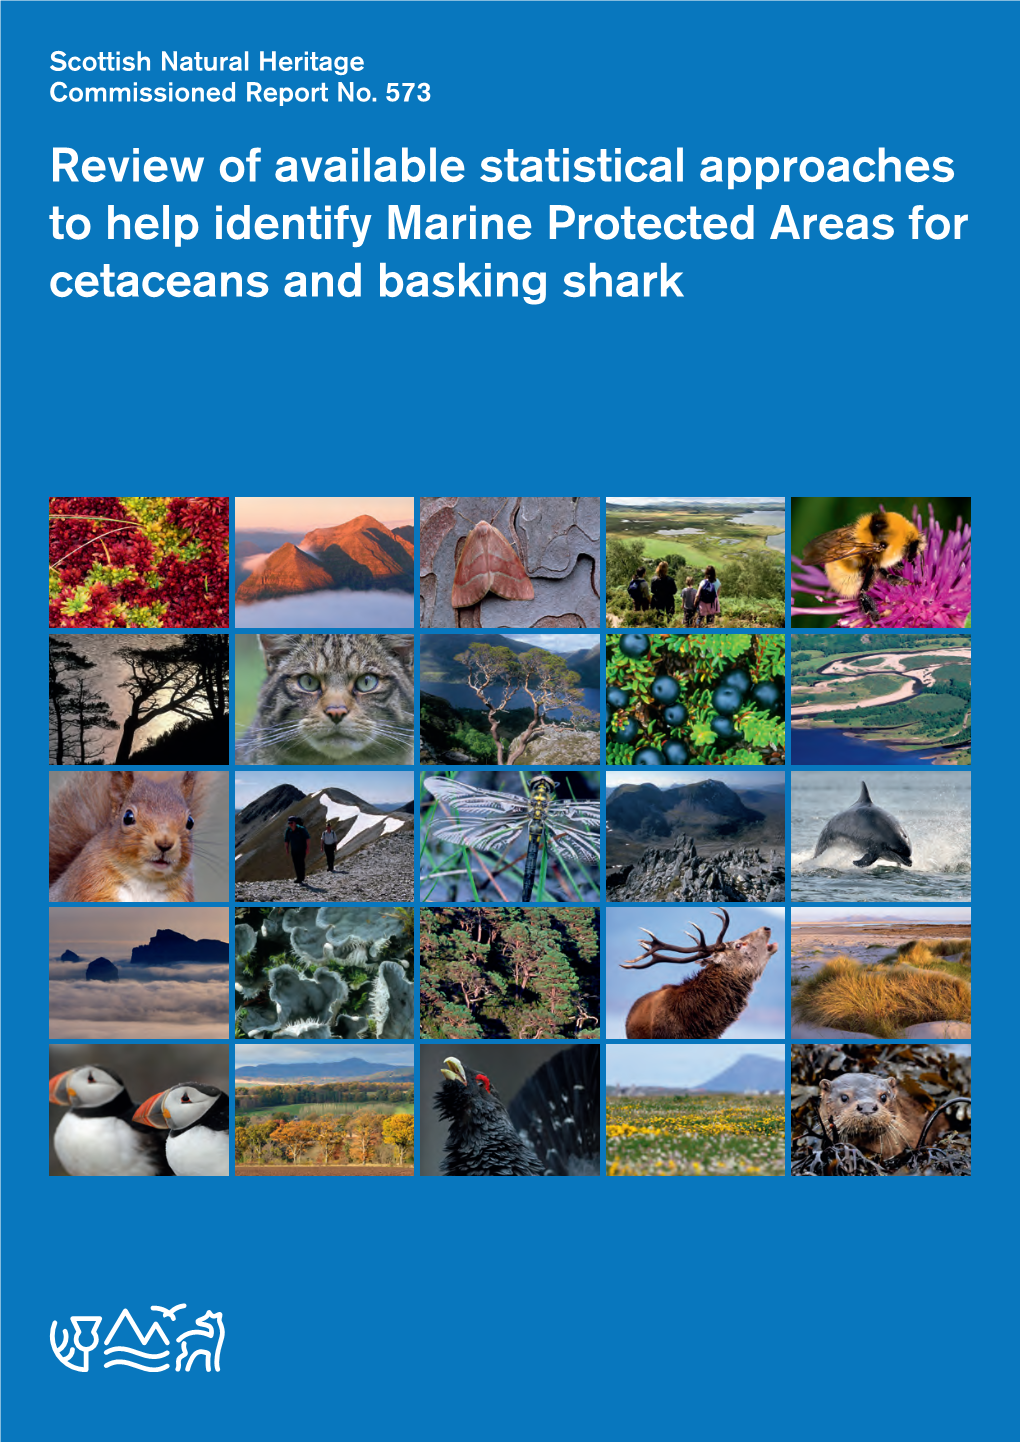 Review of Available Statistical Approaches to Help Identify Marine Protected Areas for Cetaceans and Basking Shark